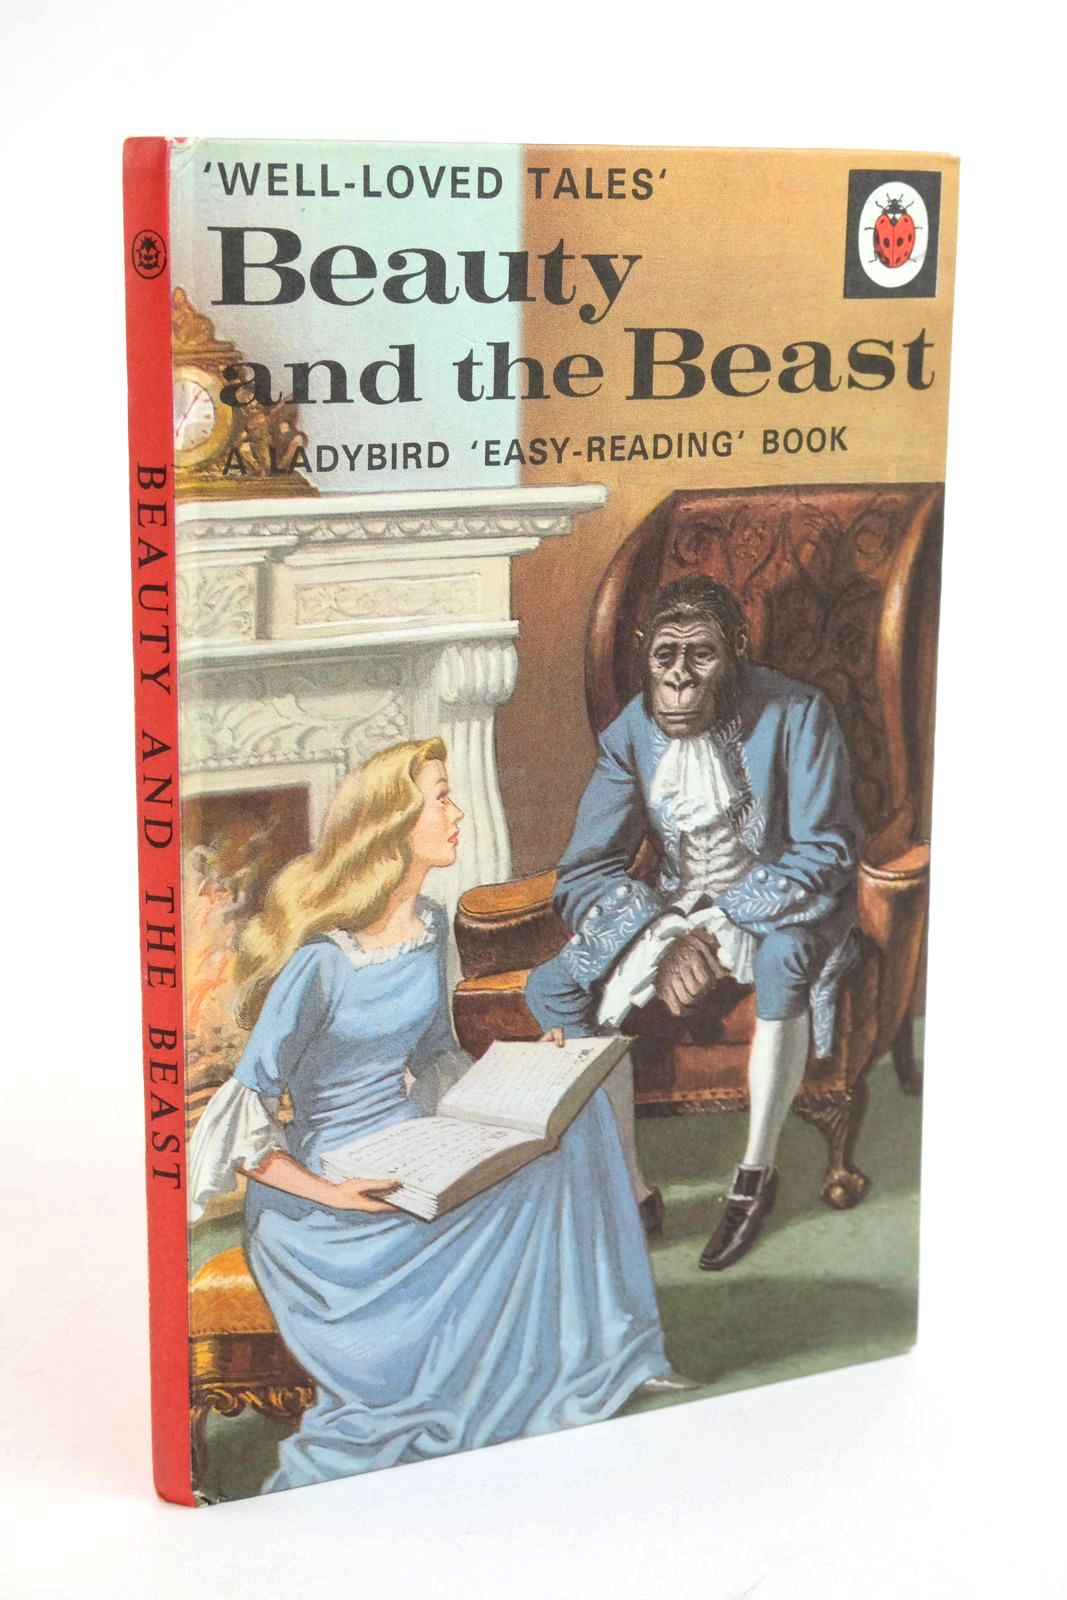 Photo of BEAUTY AND THE BEAST written by Southgate, Vera illustrated by Winter, Eric published by Wills & Hepworth Ltd. (STOCK CODE: 1322095)  for sale by Stella & Rose's Books